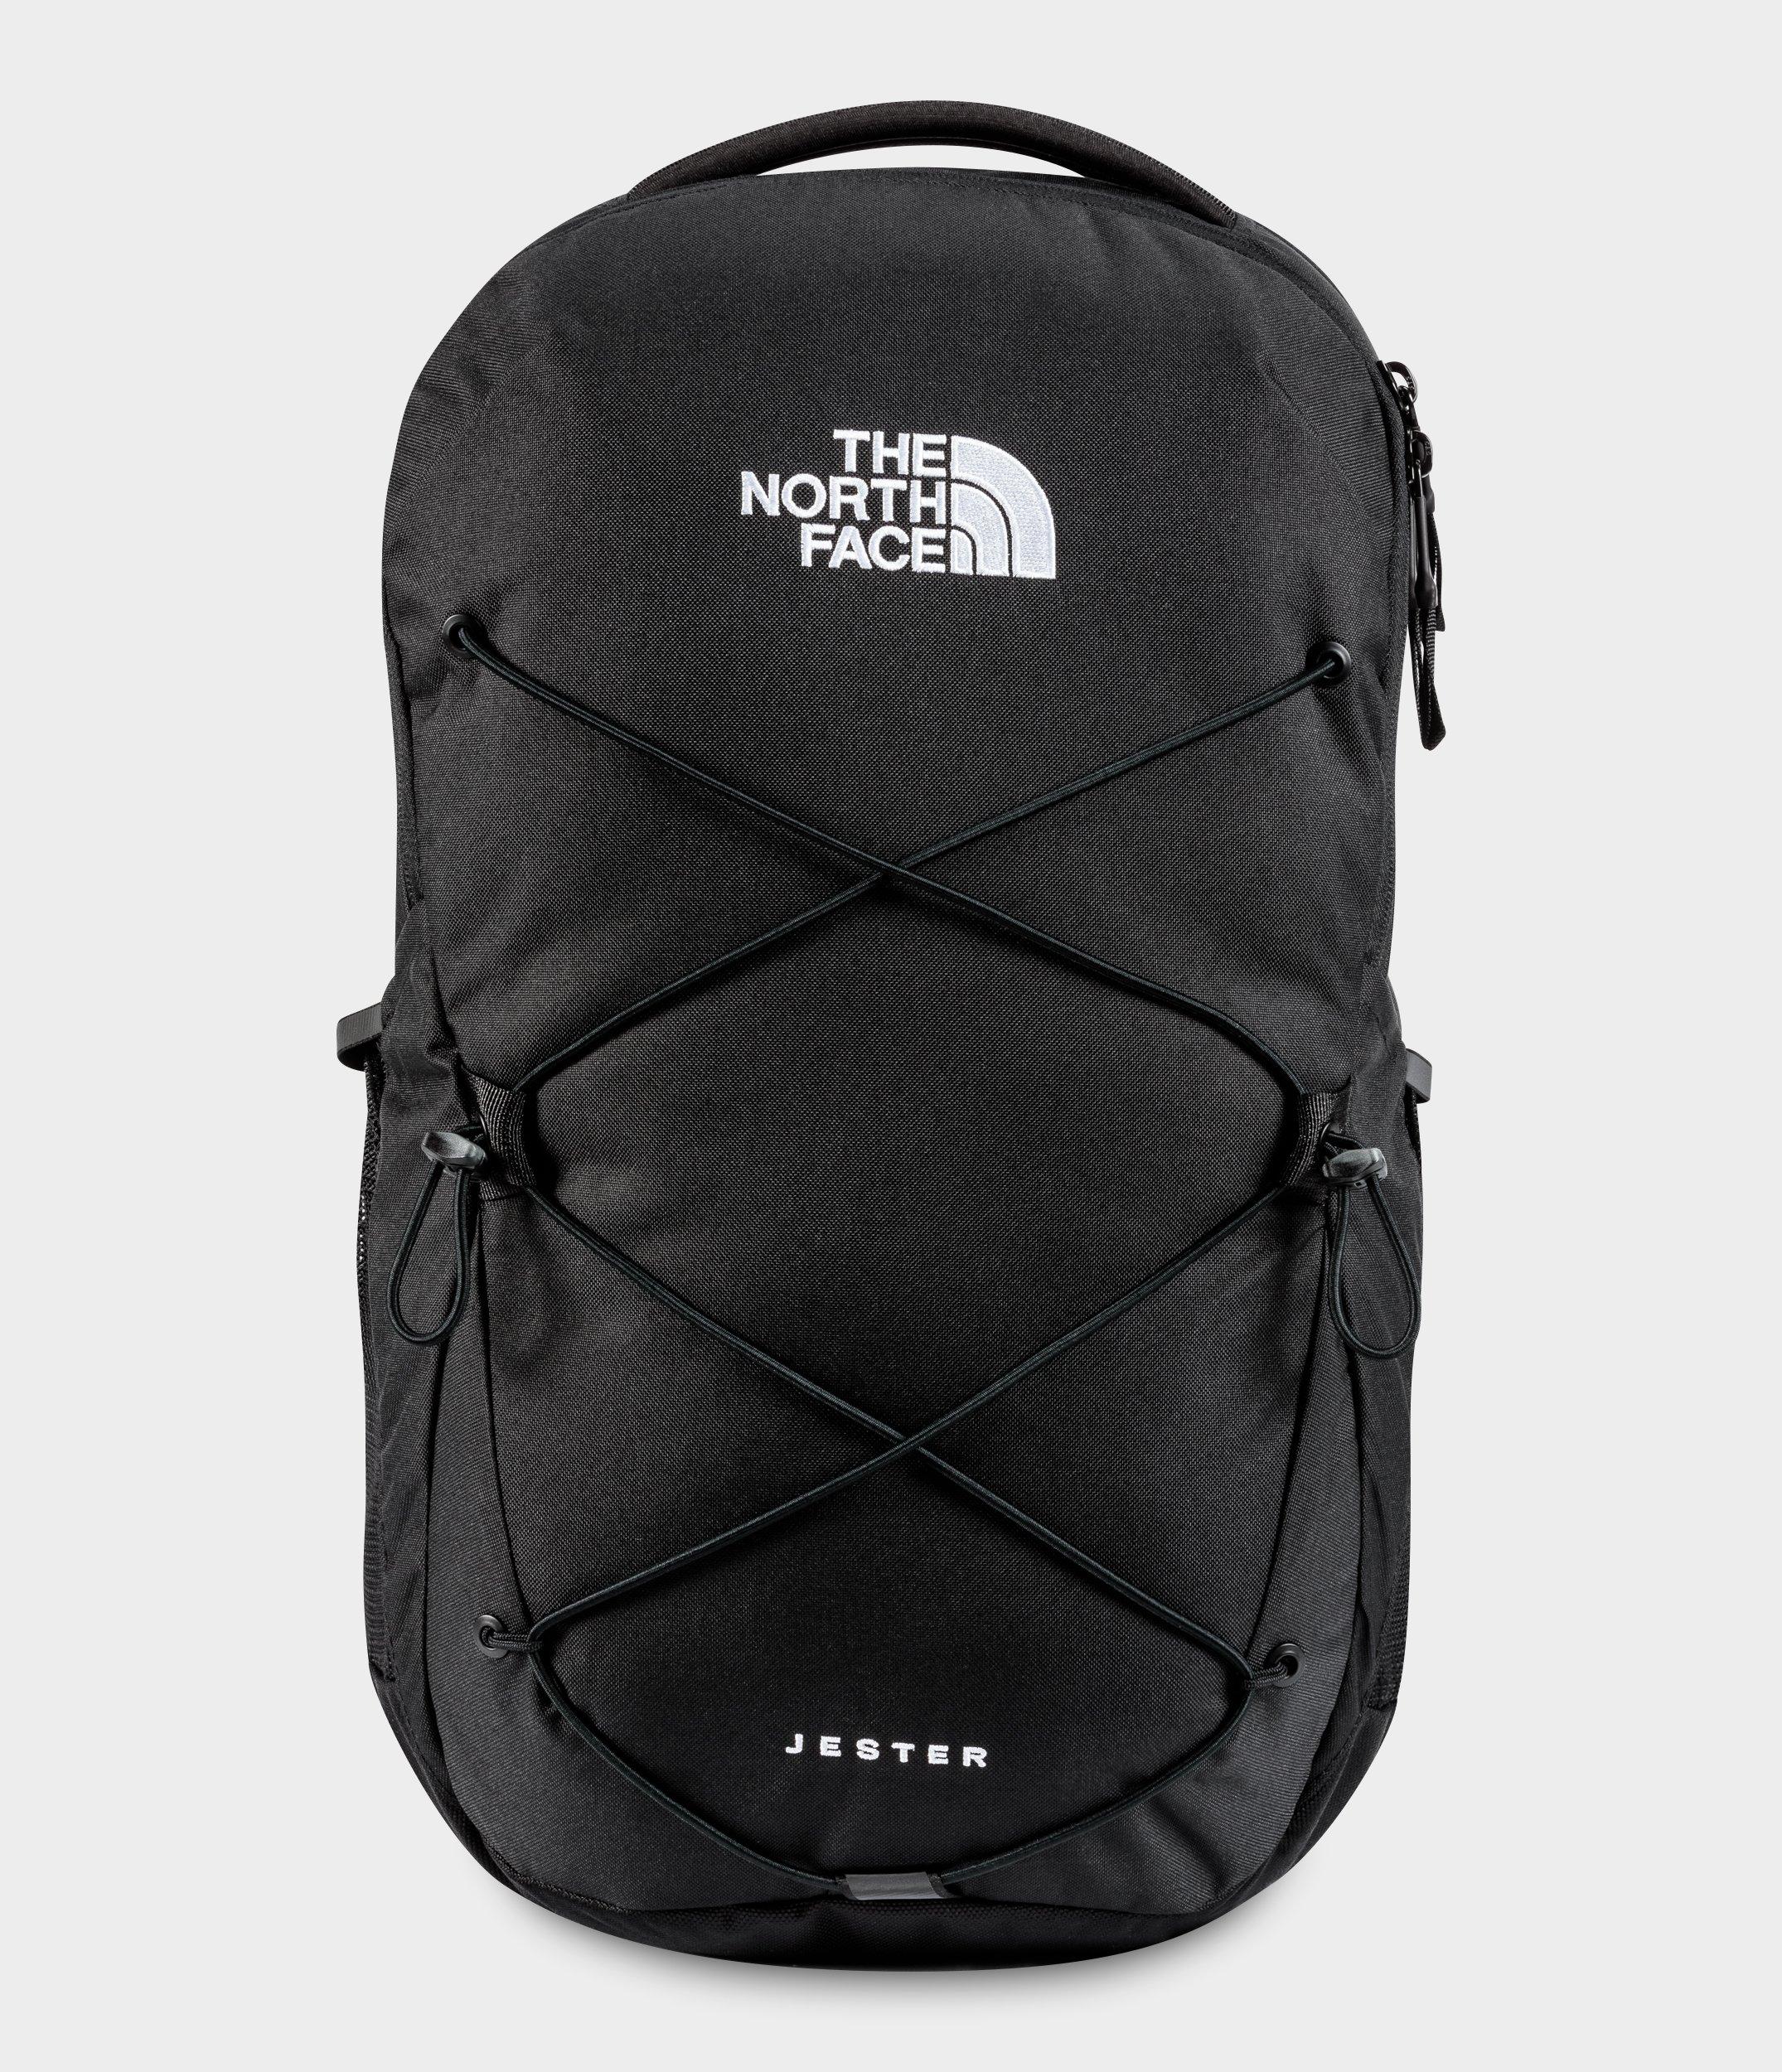 The North Face Jester Backpack-Black 